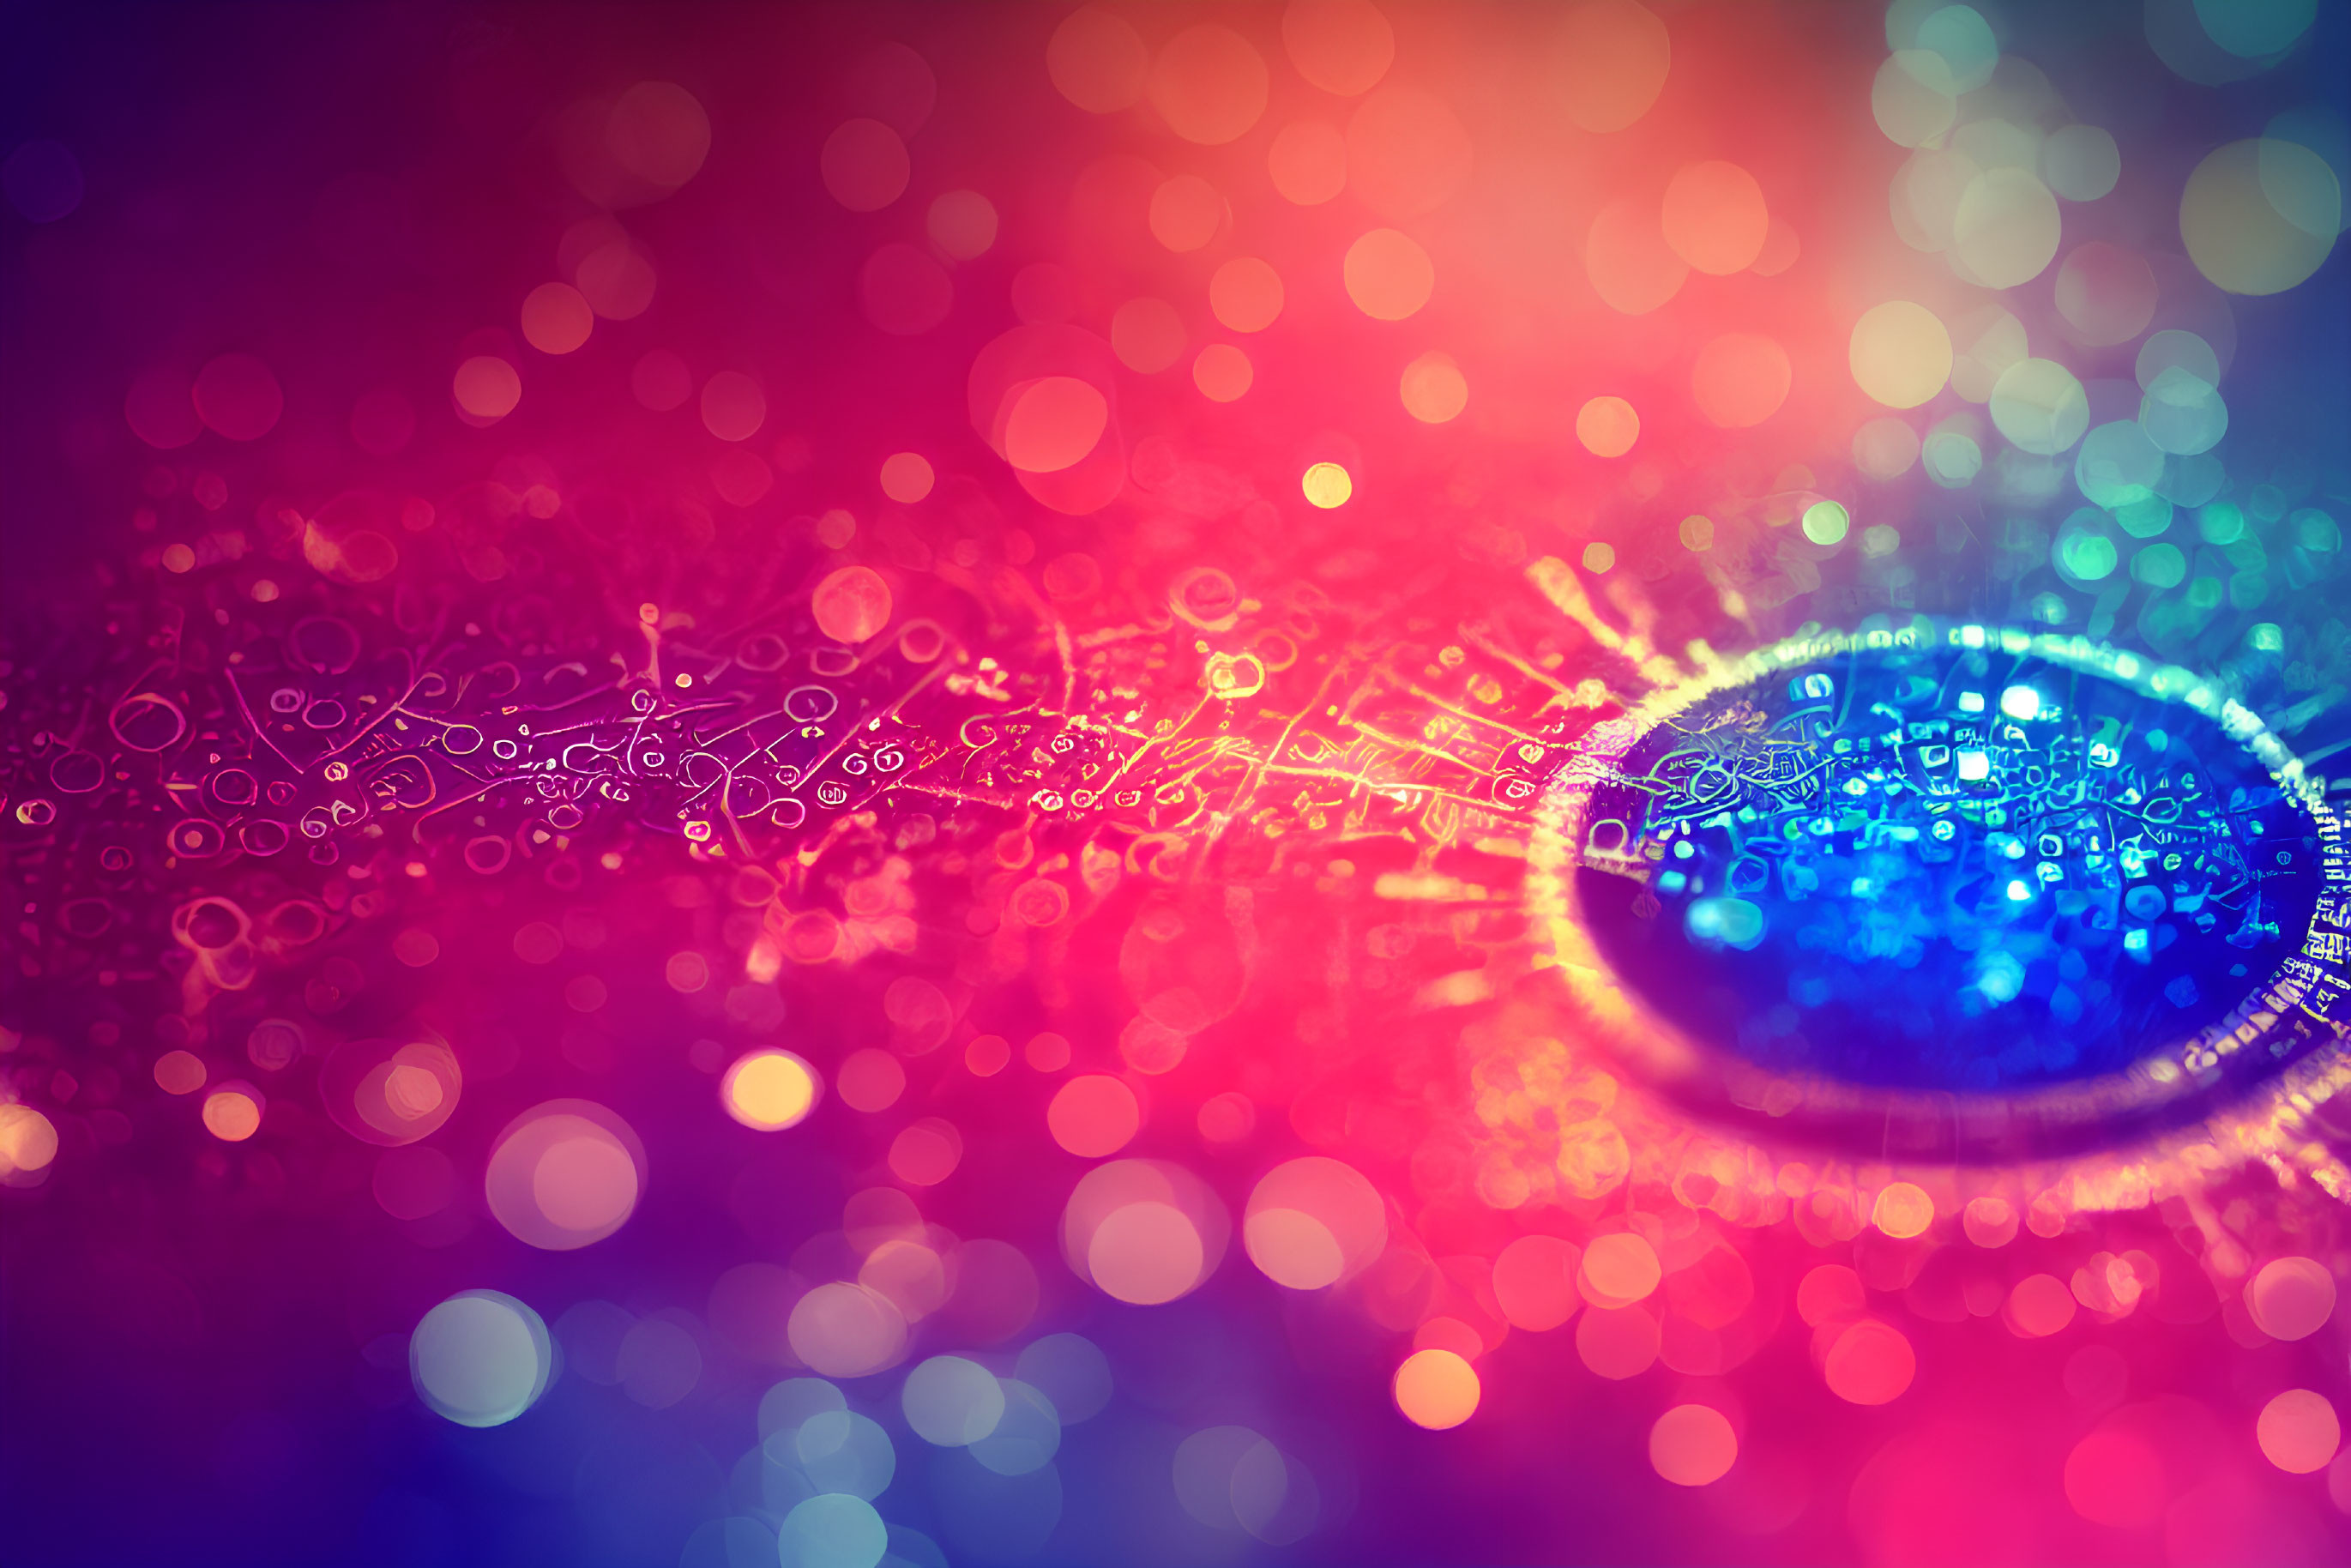 Abstract Blue and Red Gradient Image with Glowing Circular Pattern and Bokeh Lights